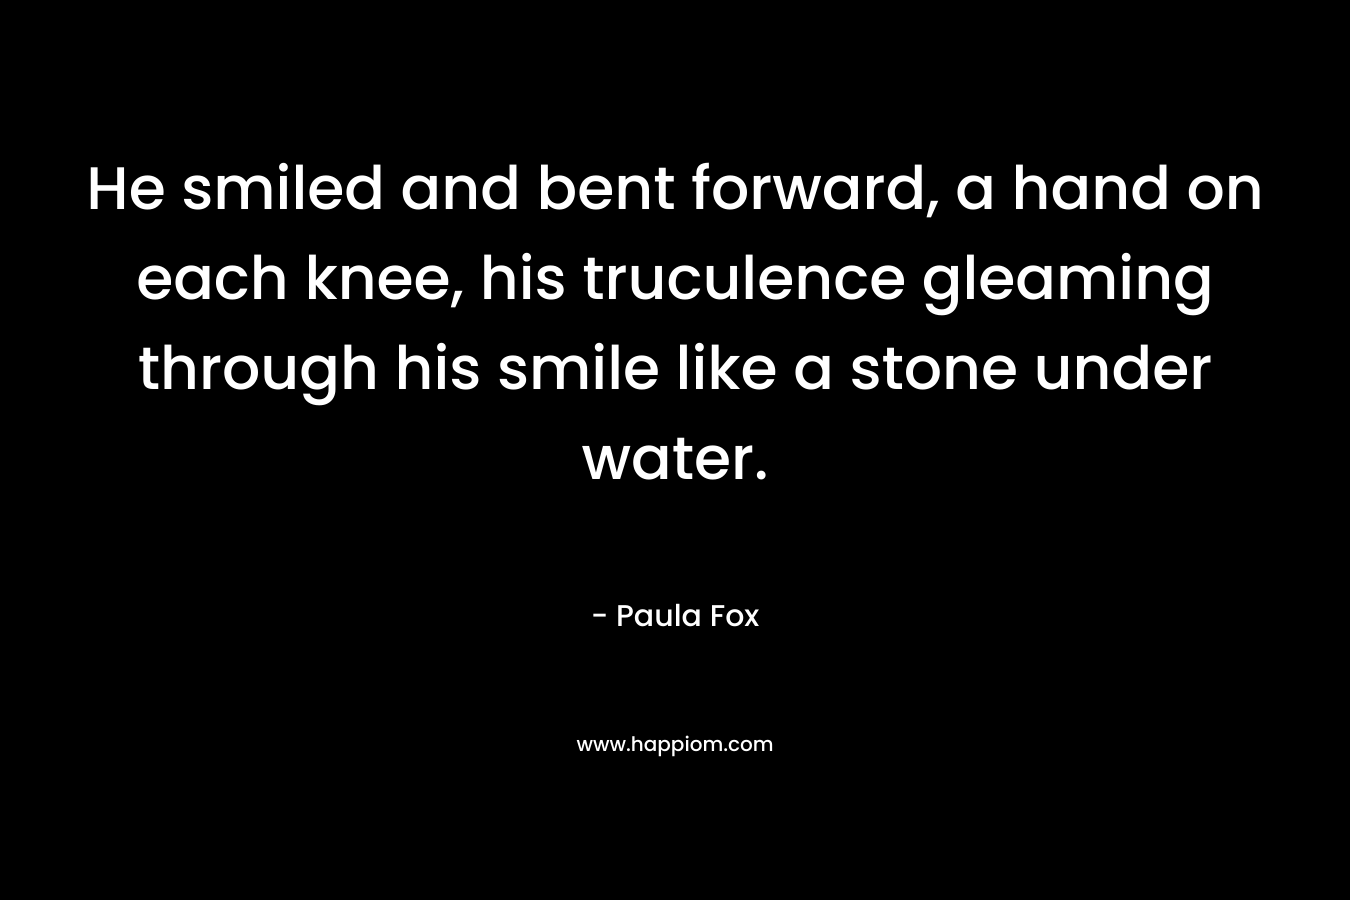 He smiled and bent forward, a hand on each knee, his truculence gleaming through his smile like a stone under water. – Paula Fox